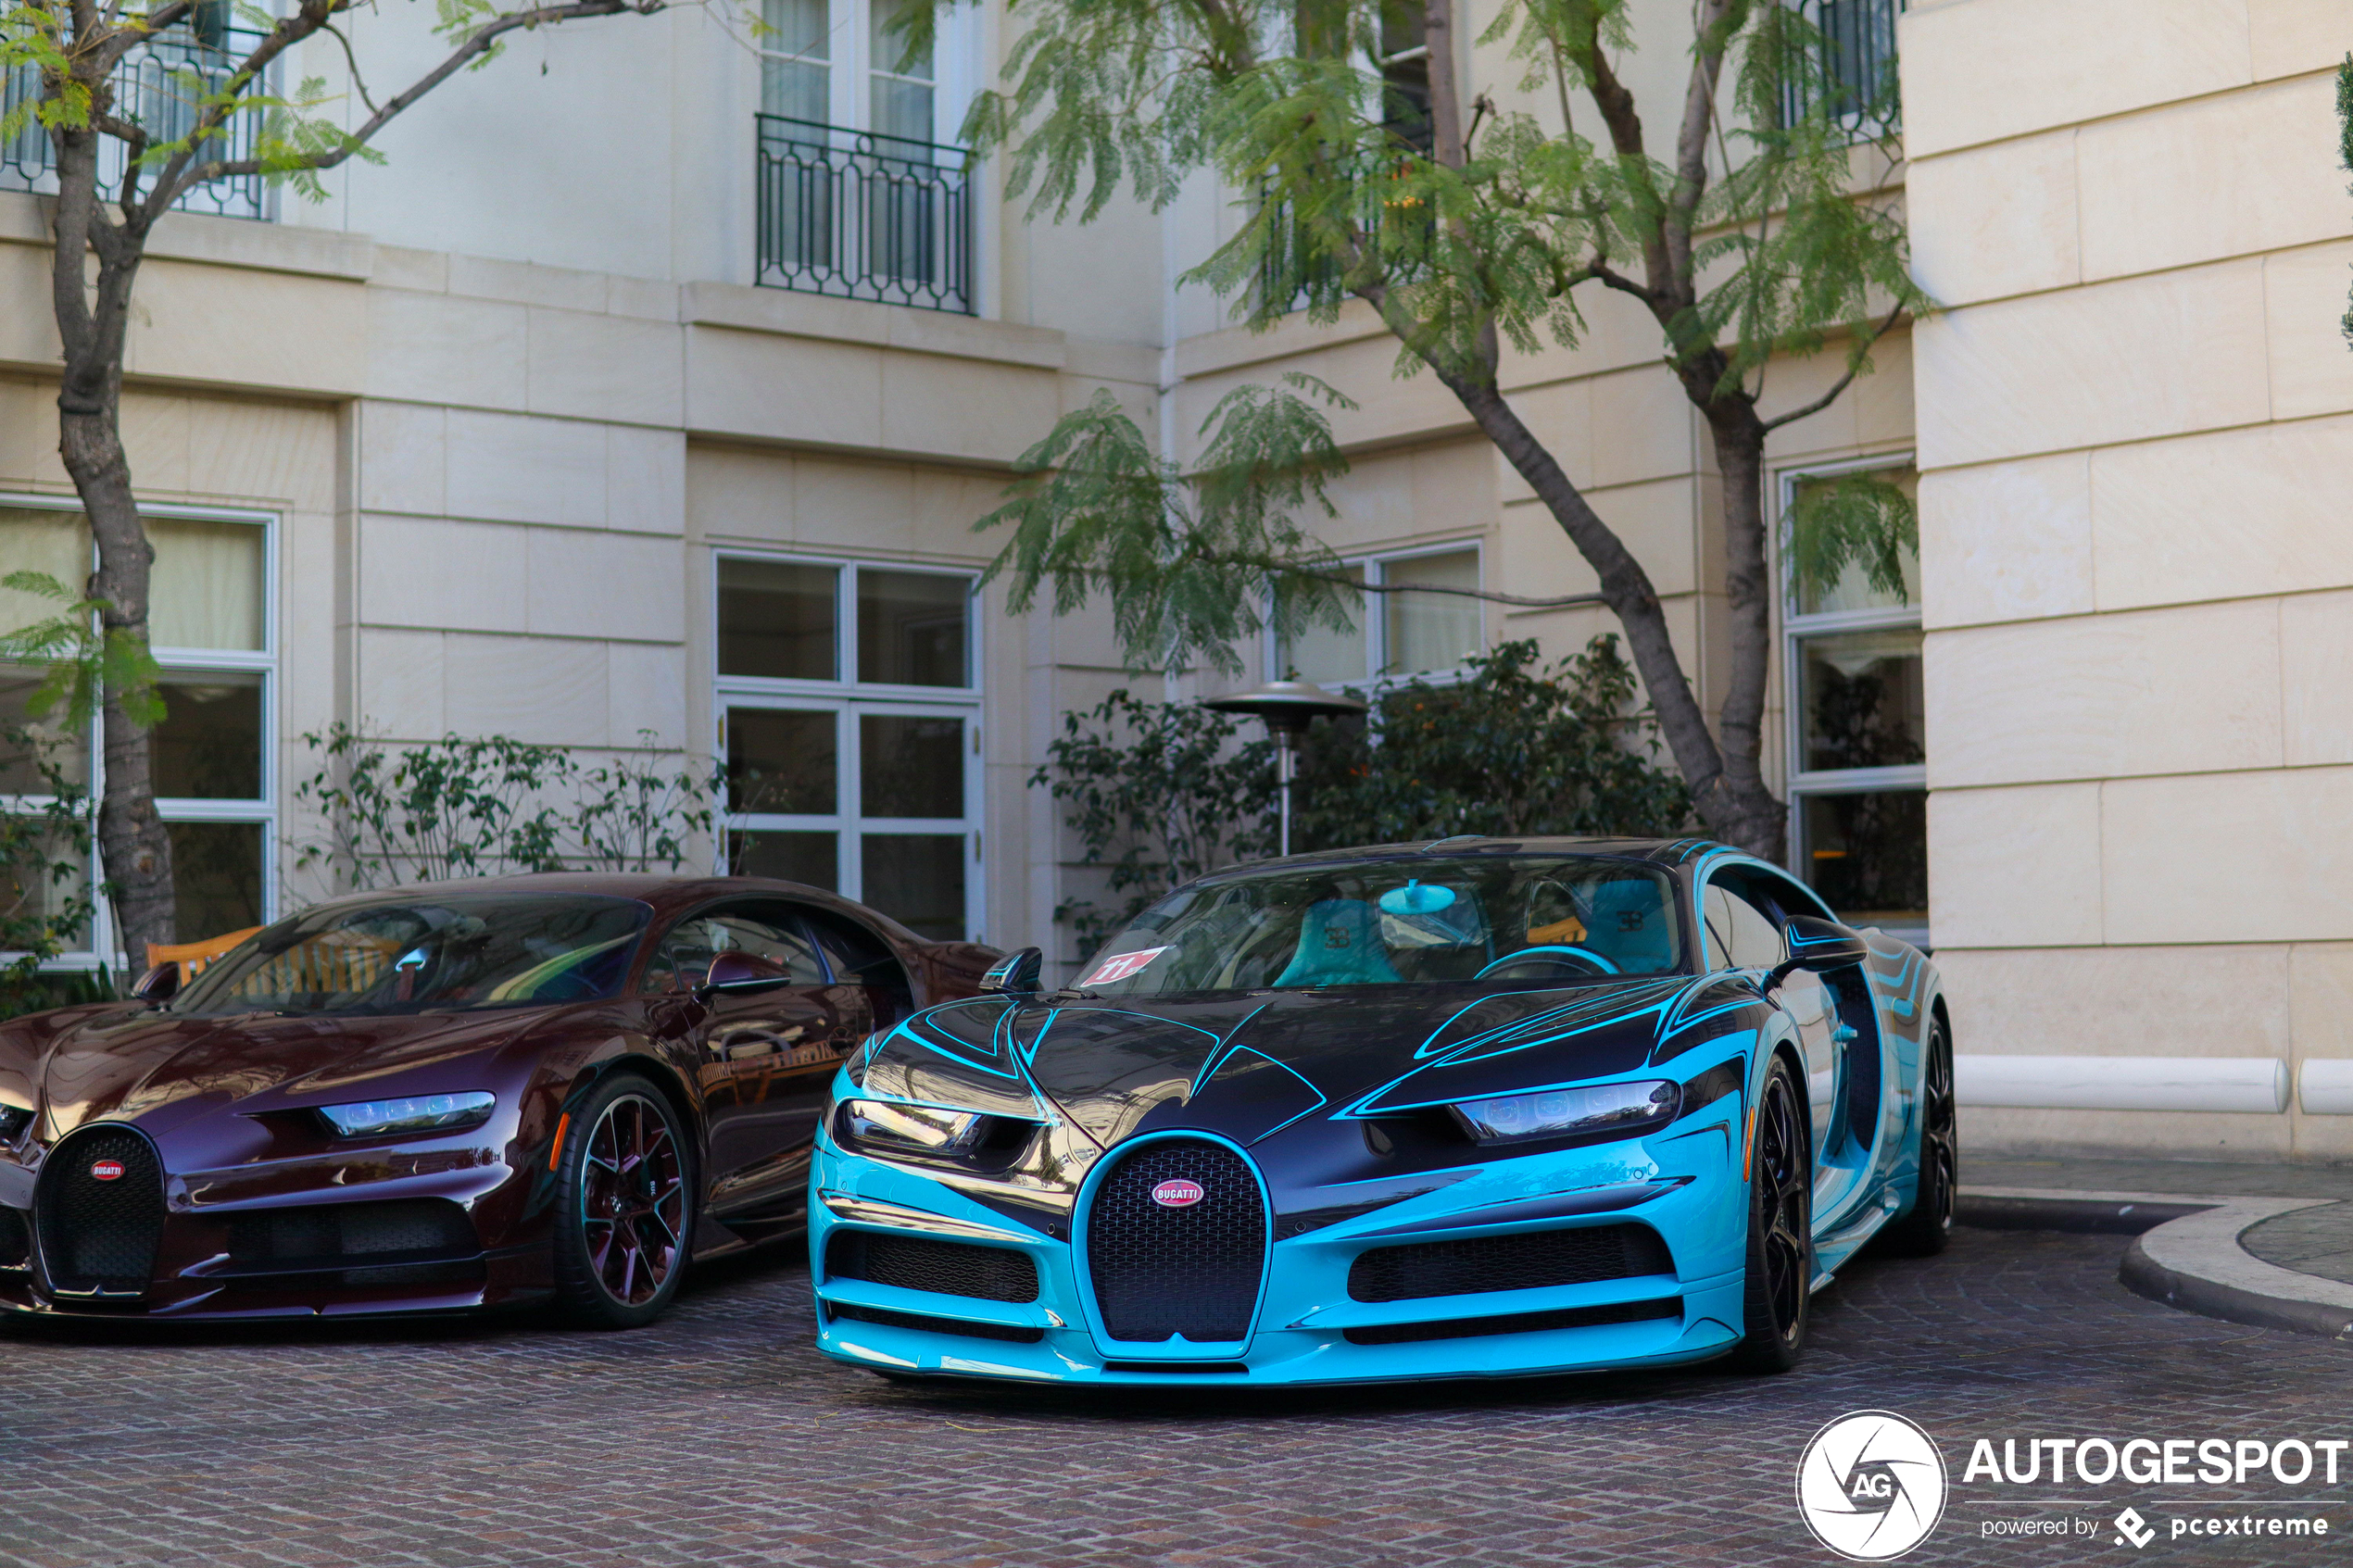 This Bugatti Chiron is inspired by the zebra